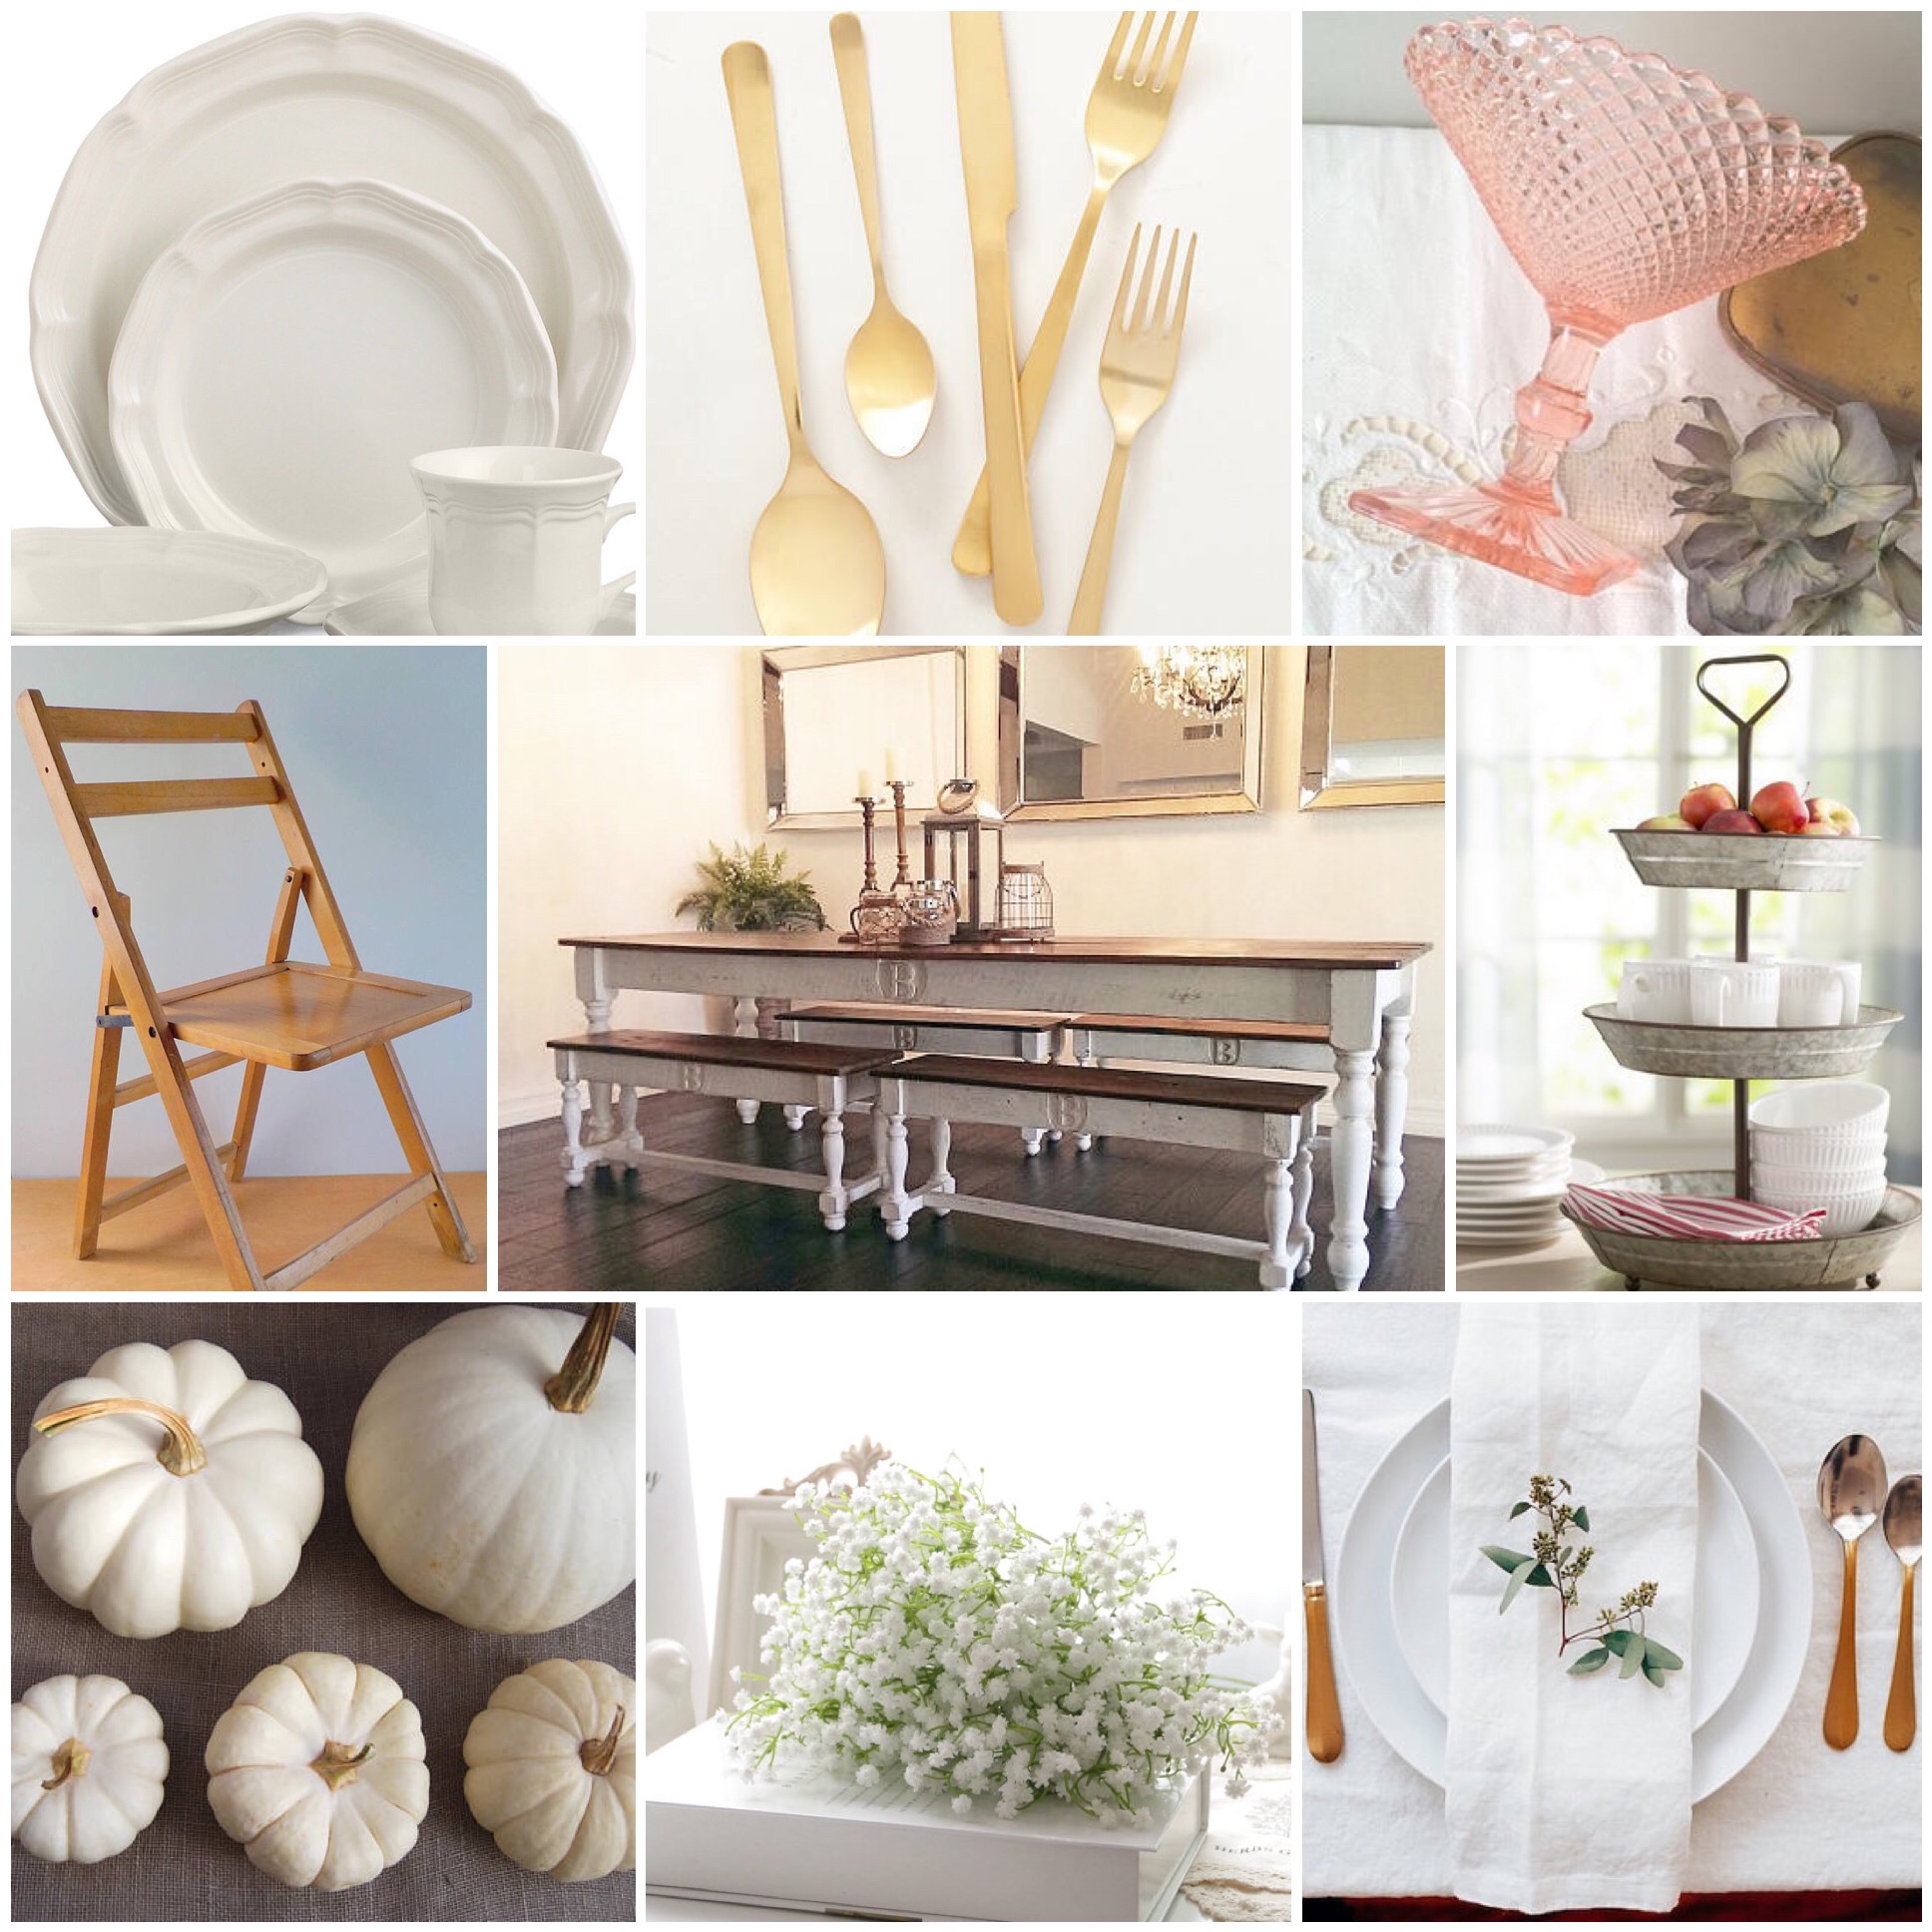 Midweek Must Haves #13: Farmhouse Chic Thanksgiving